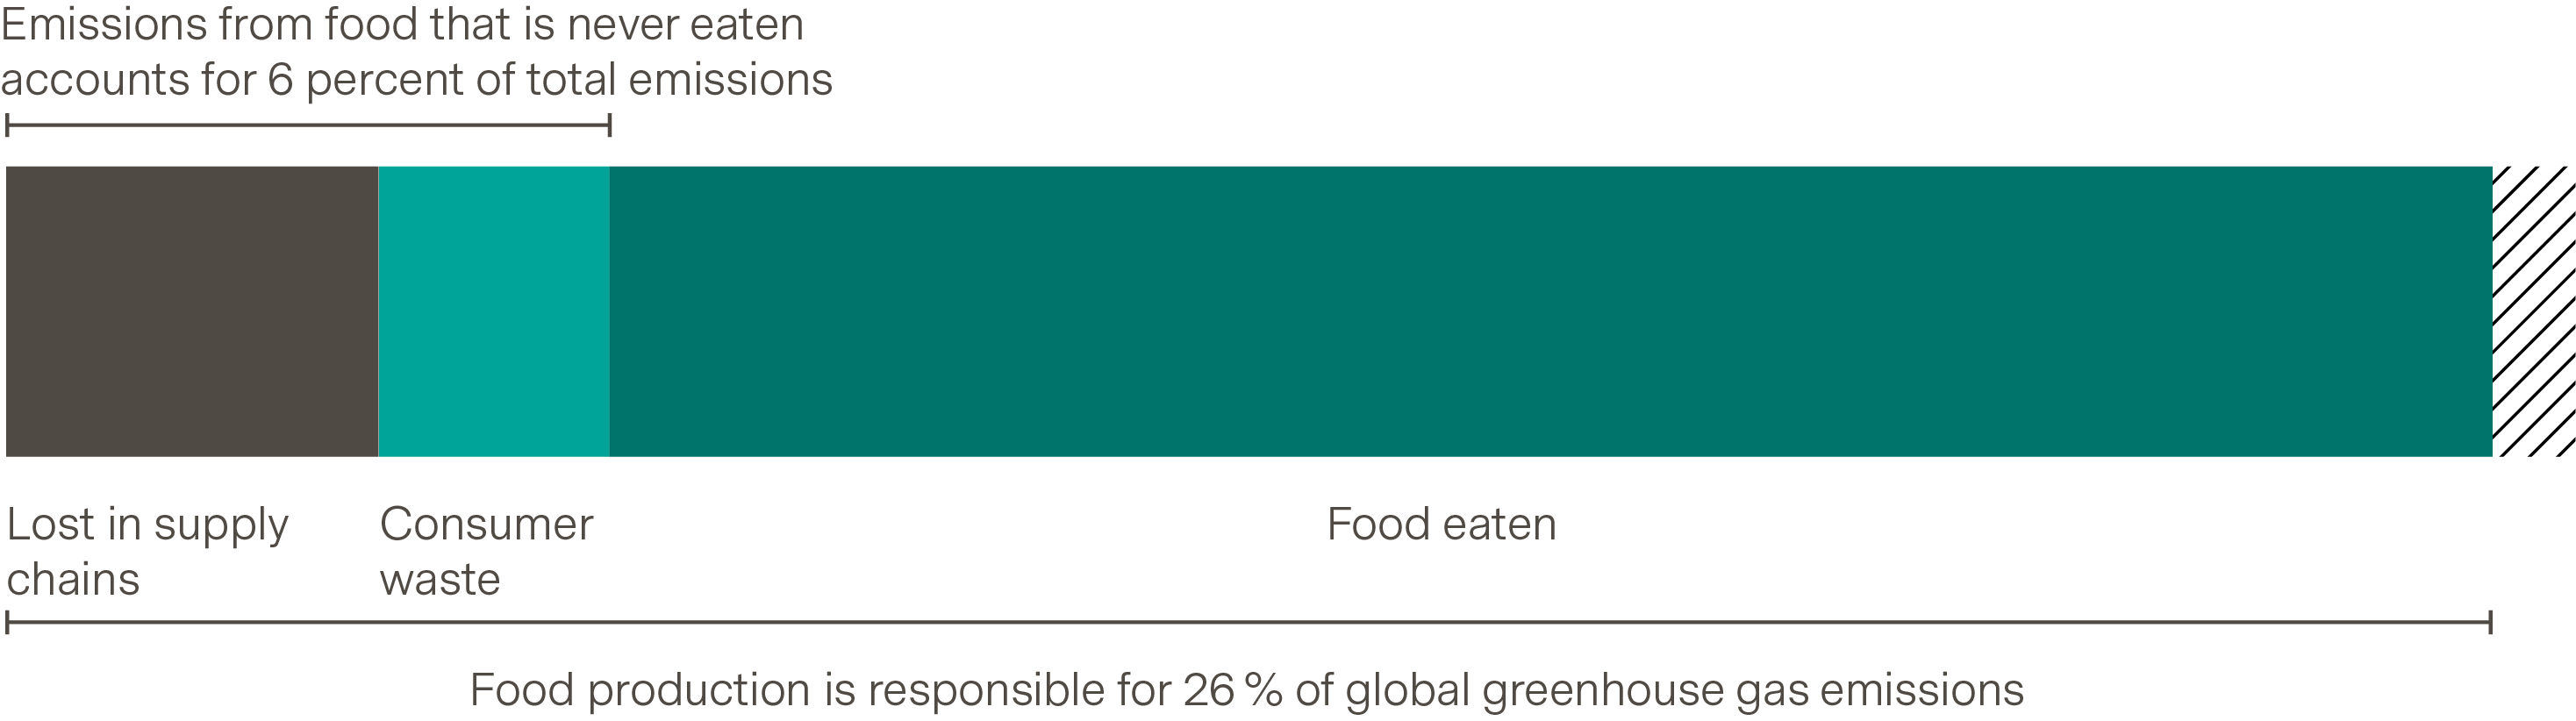 6 Percent of Global Greenhouse Gas Emissions Come From Food Losses and Waste